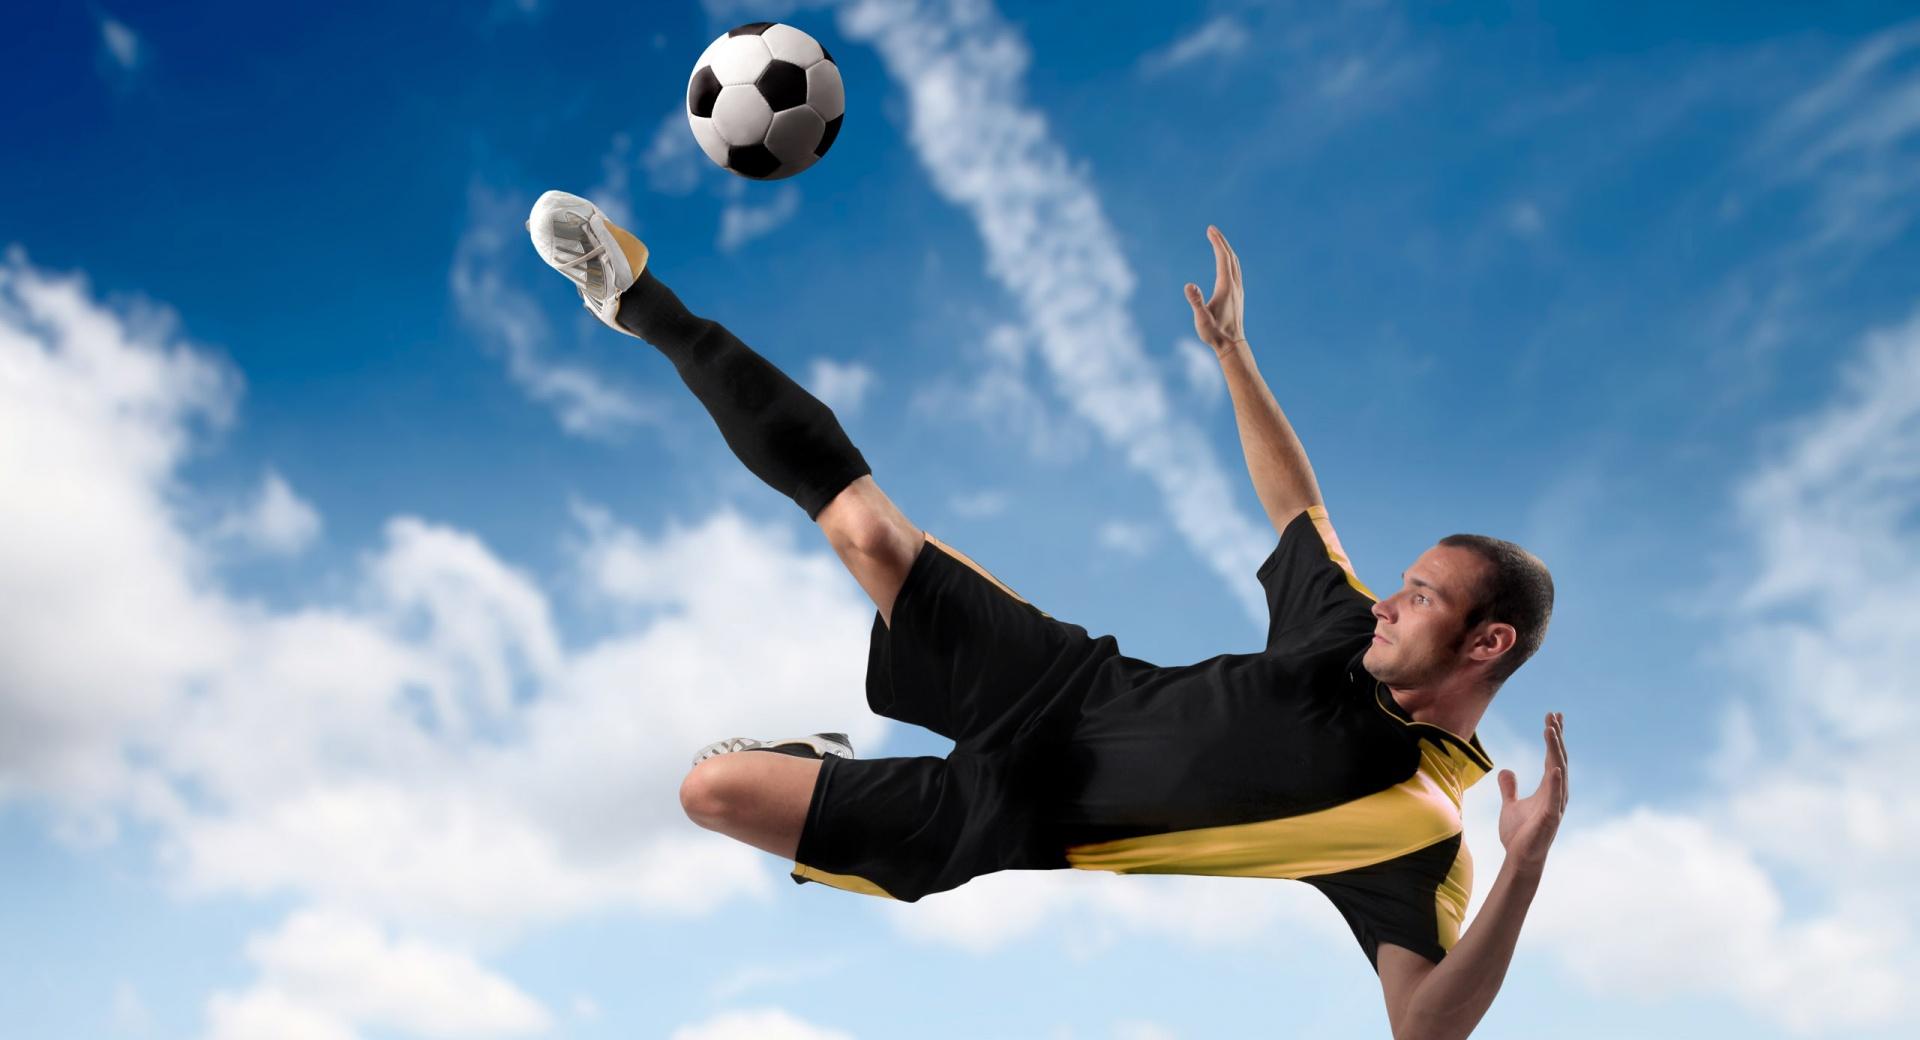 Football Player Kicking The Ball in Mid Air wallpapers HD quality